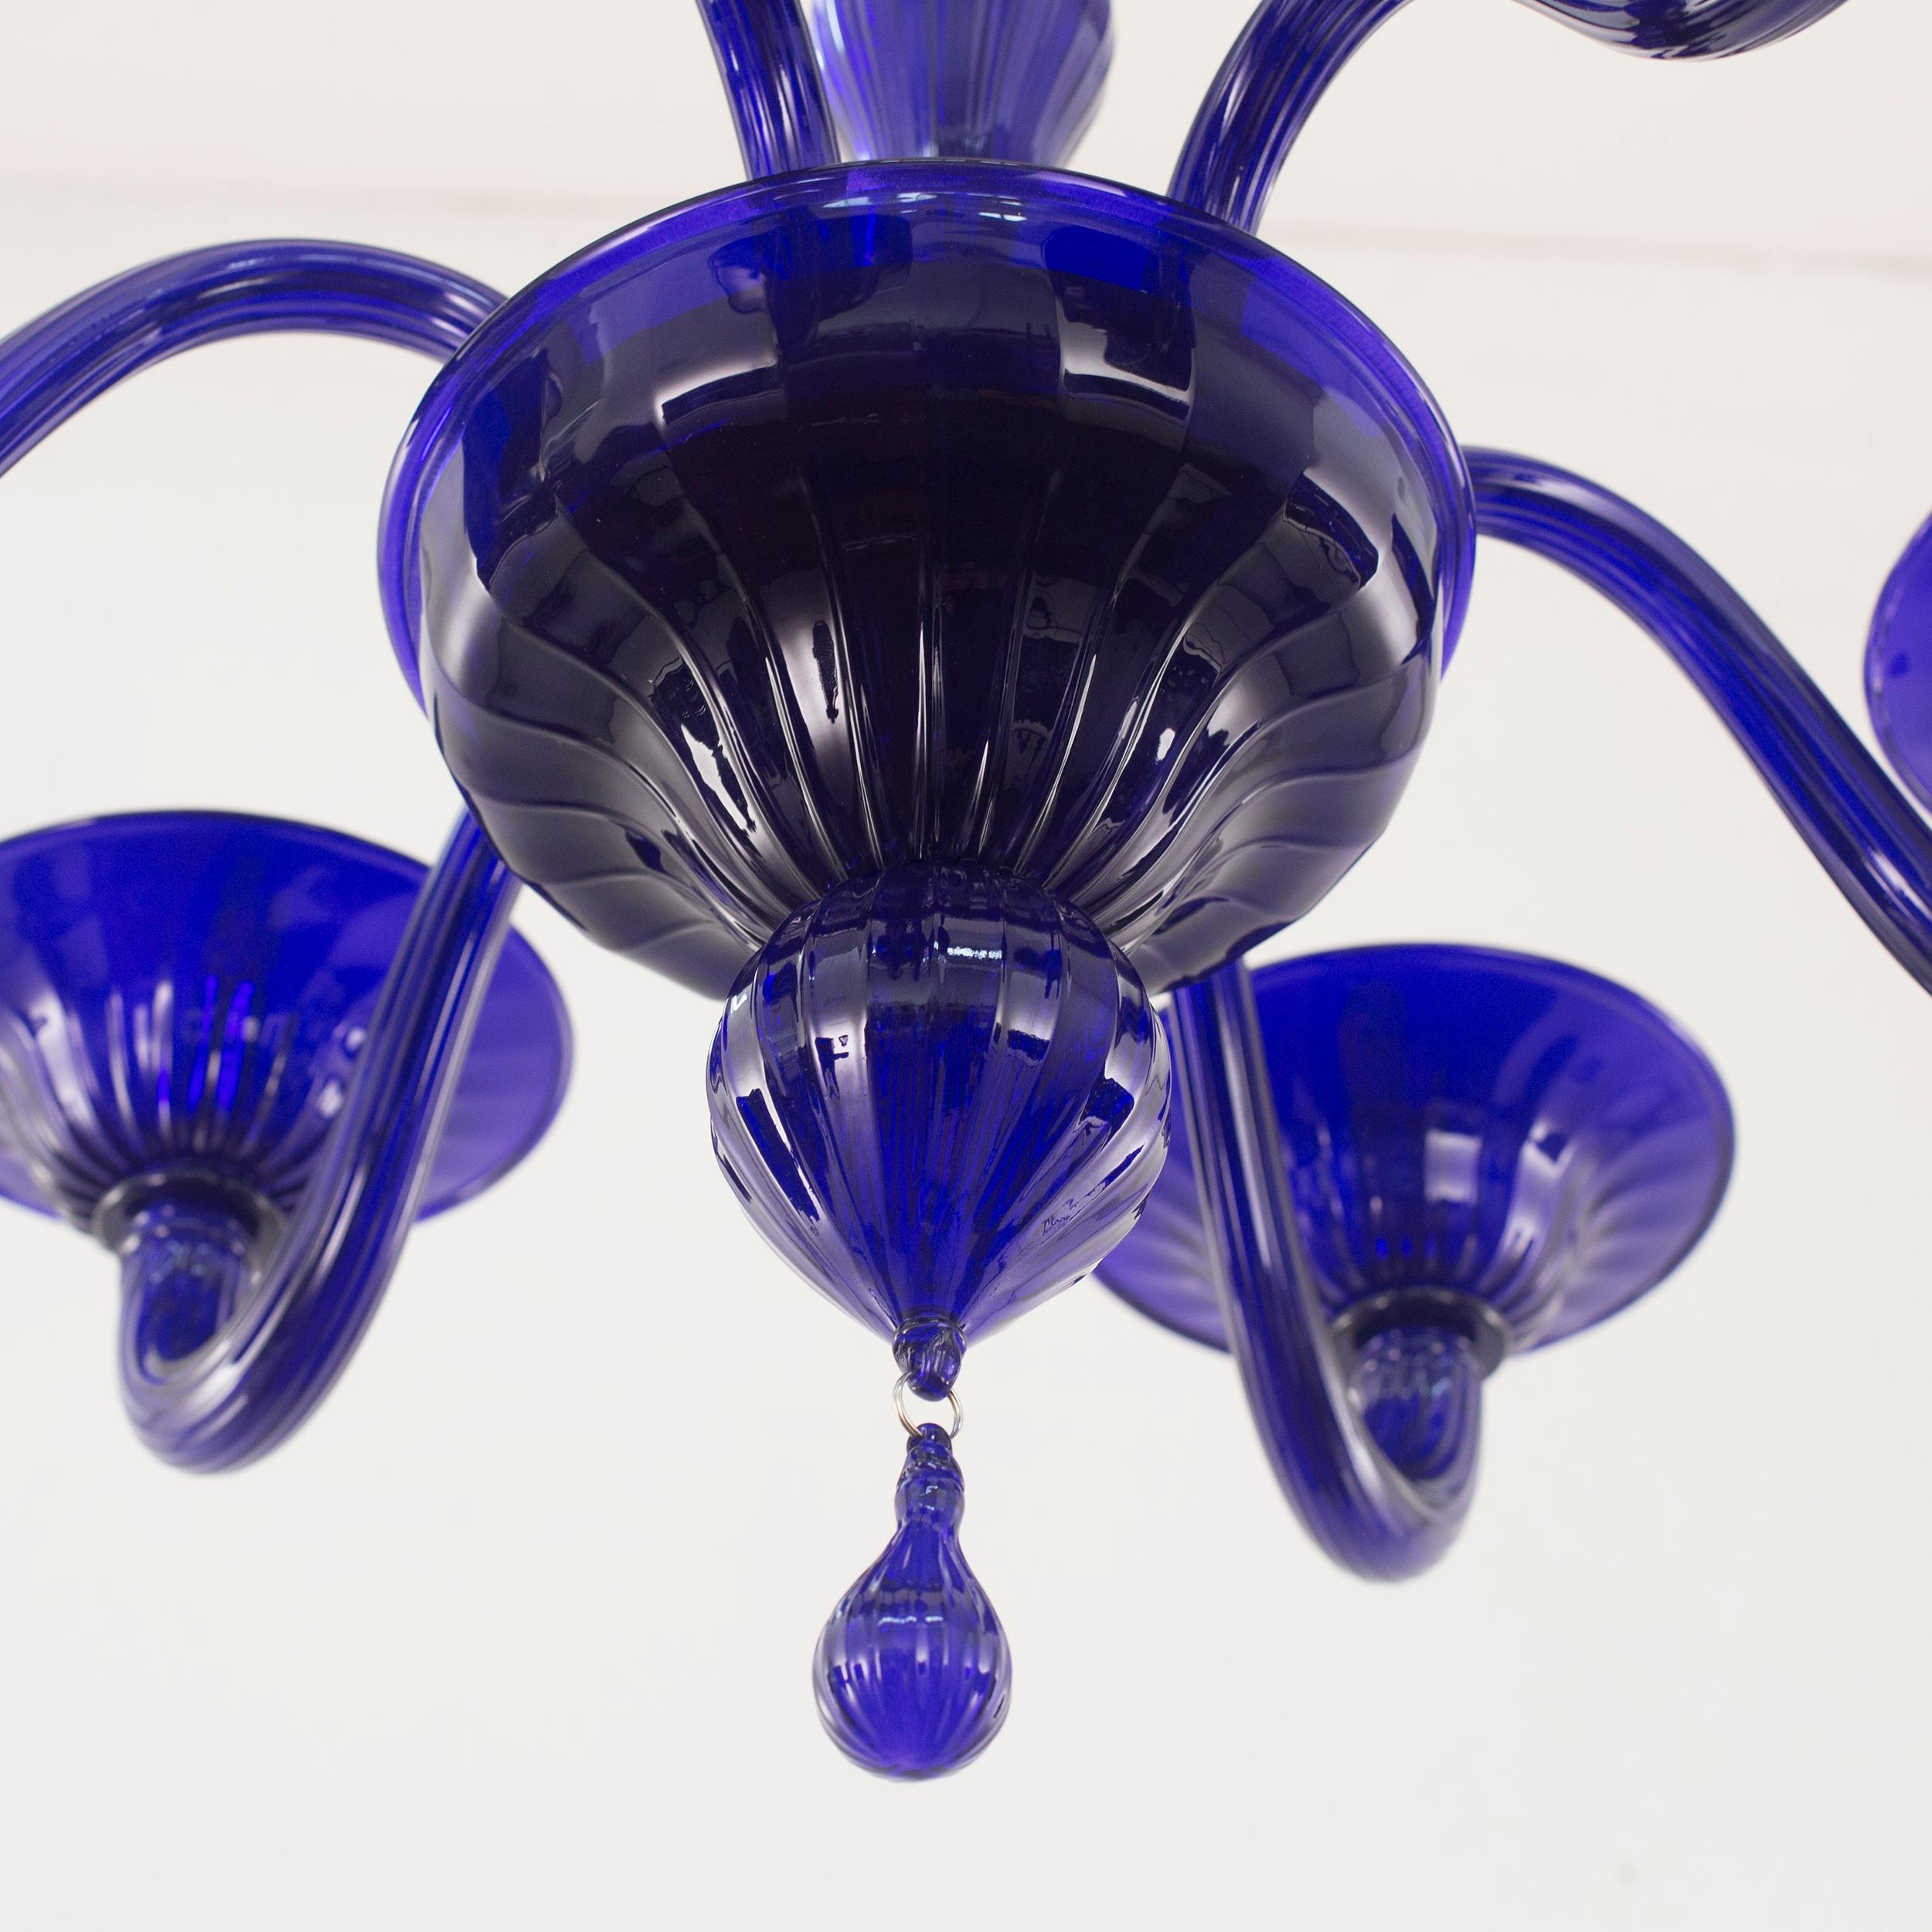 21st Century Chandelier, 6 Arms Blue Murano Glass by Multiforme In New Condition For Sale In Trebaseleghe, IT